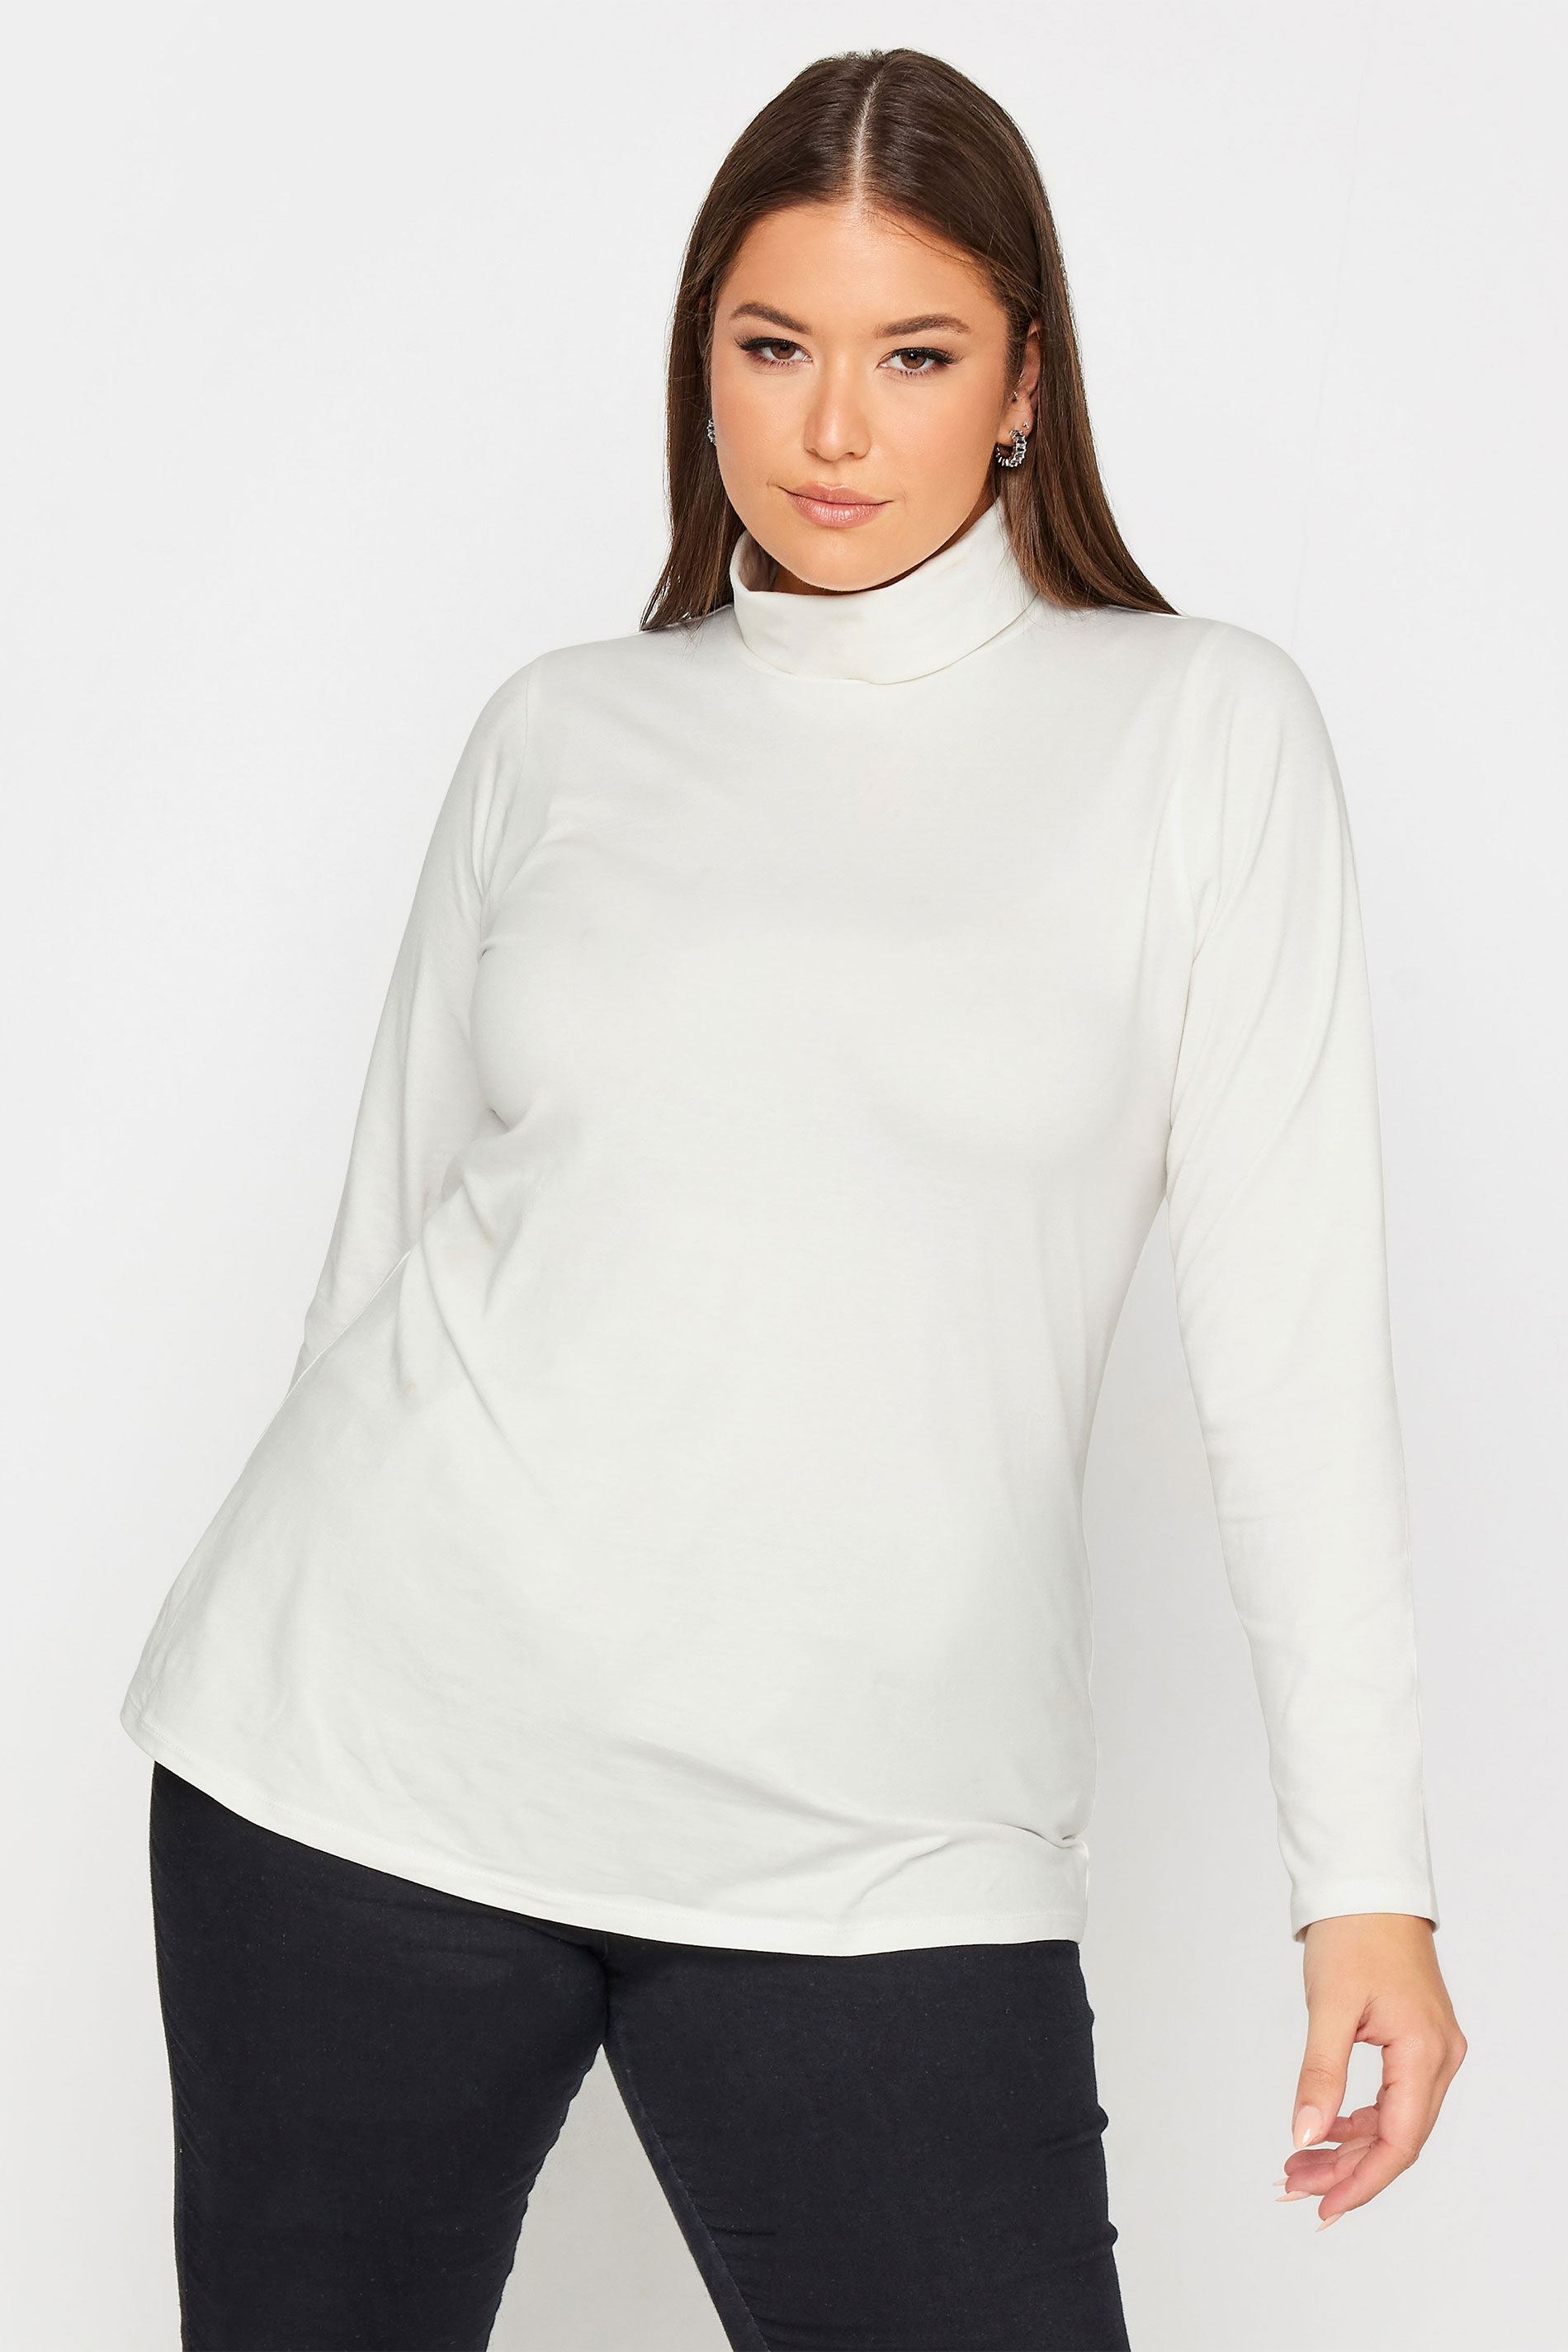 YOURS Plus Size White Long Sleeve Turtle Neck Top | Yours Clothing 1